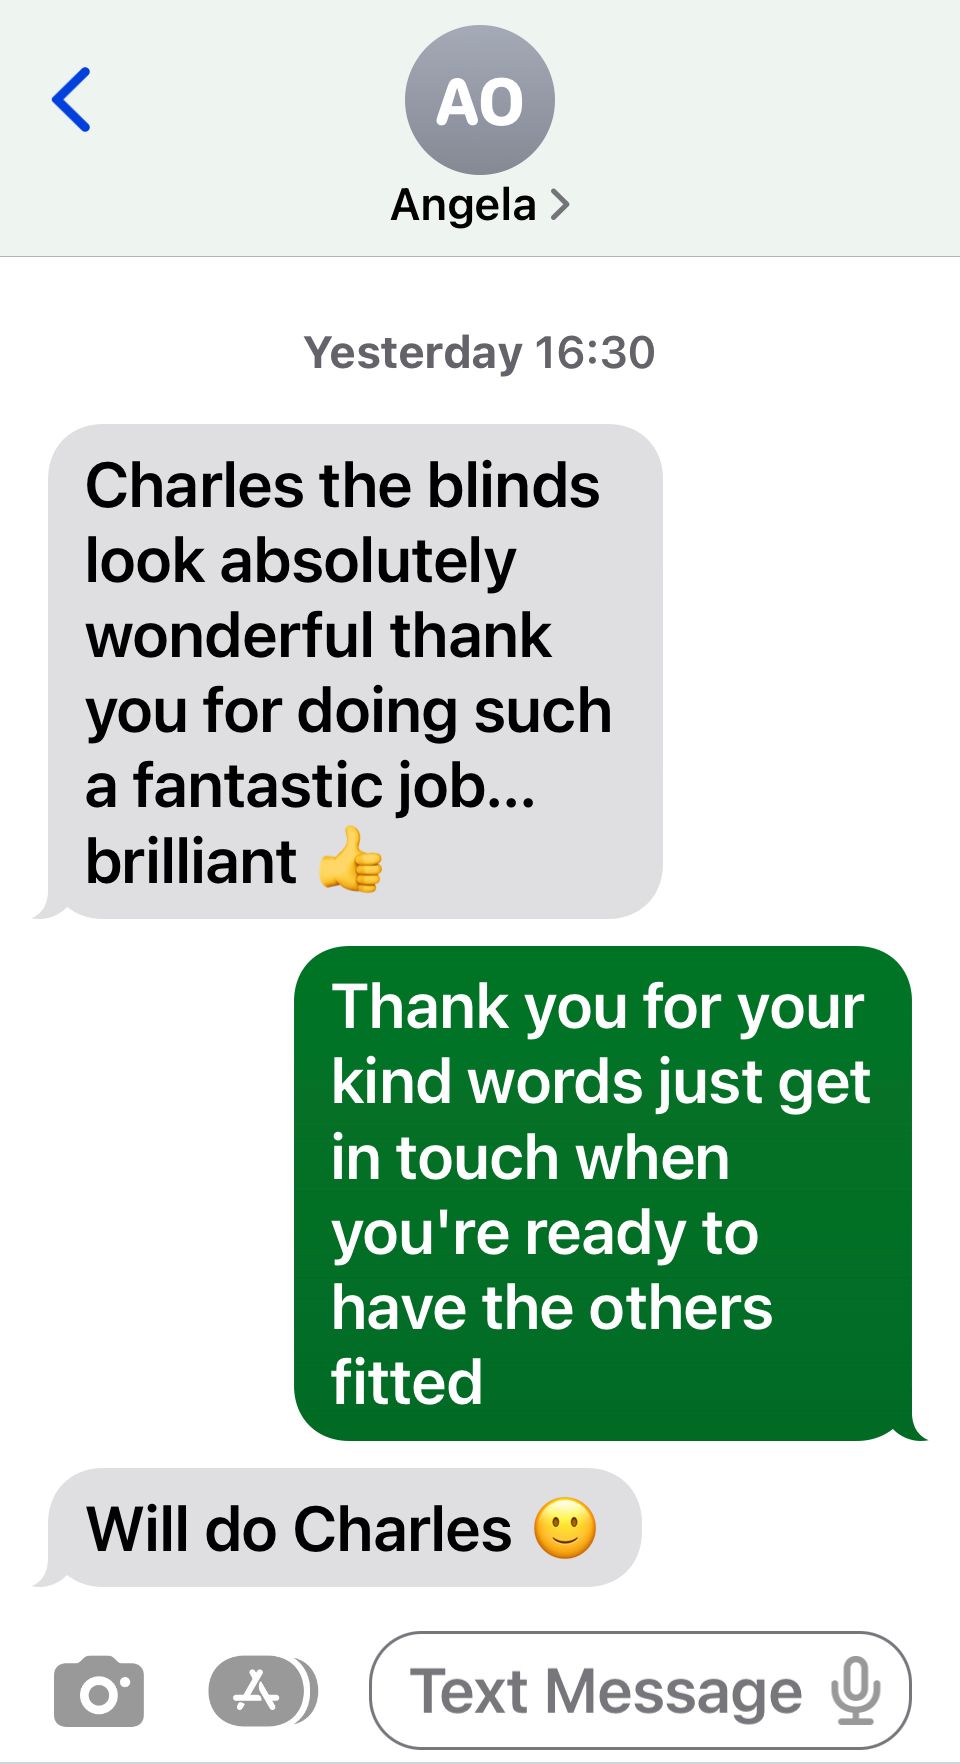 Charles the blinds look absolutely wonderful thank you for doing such a fantastic job brilliant